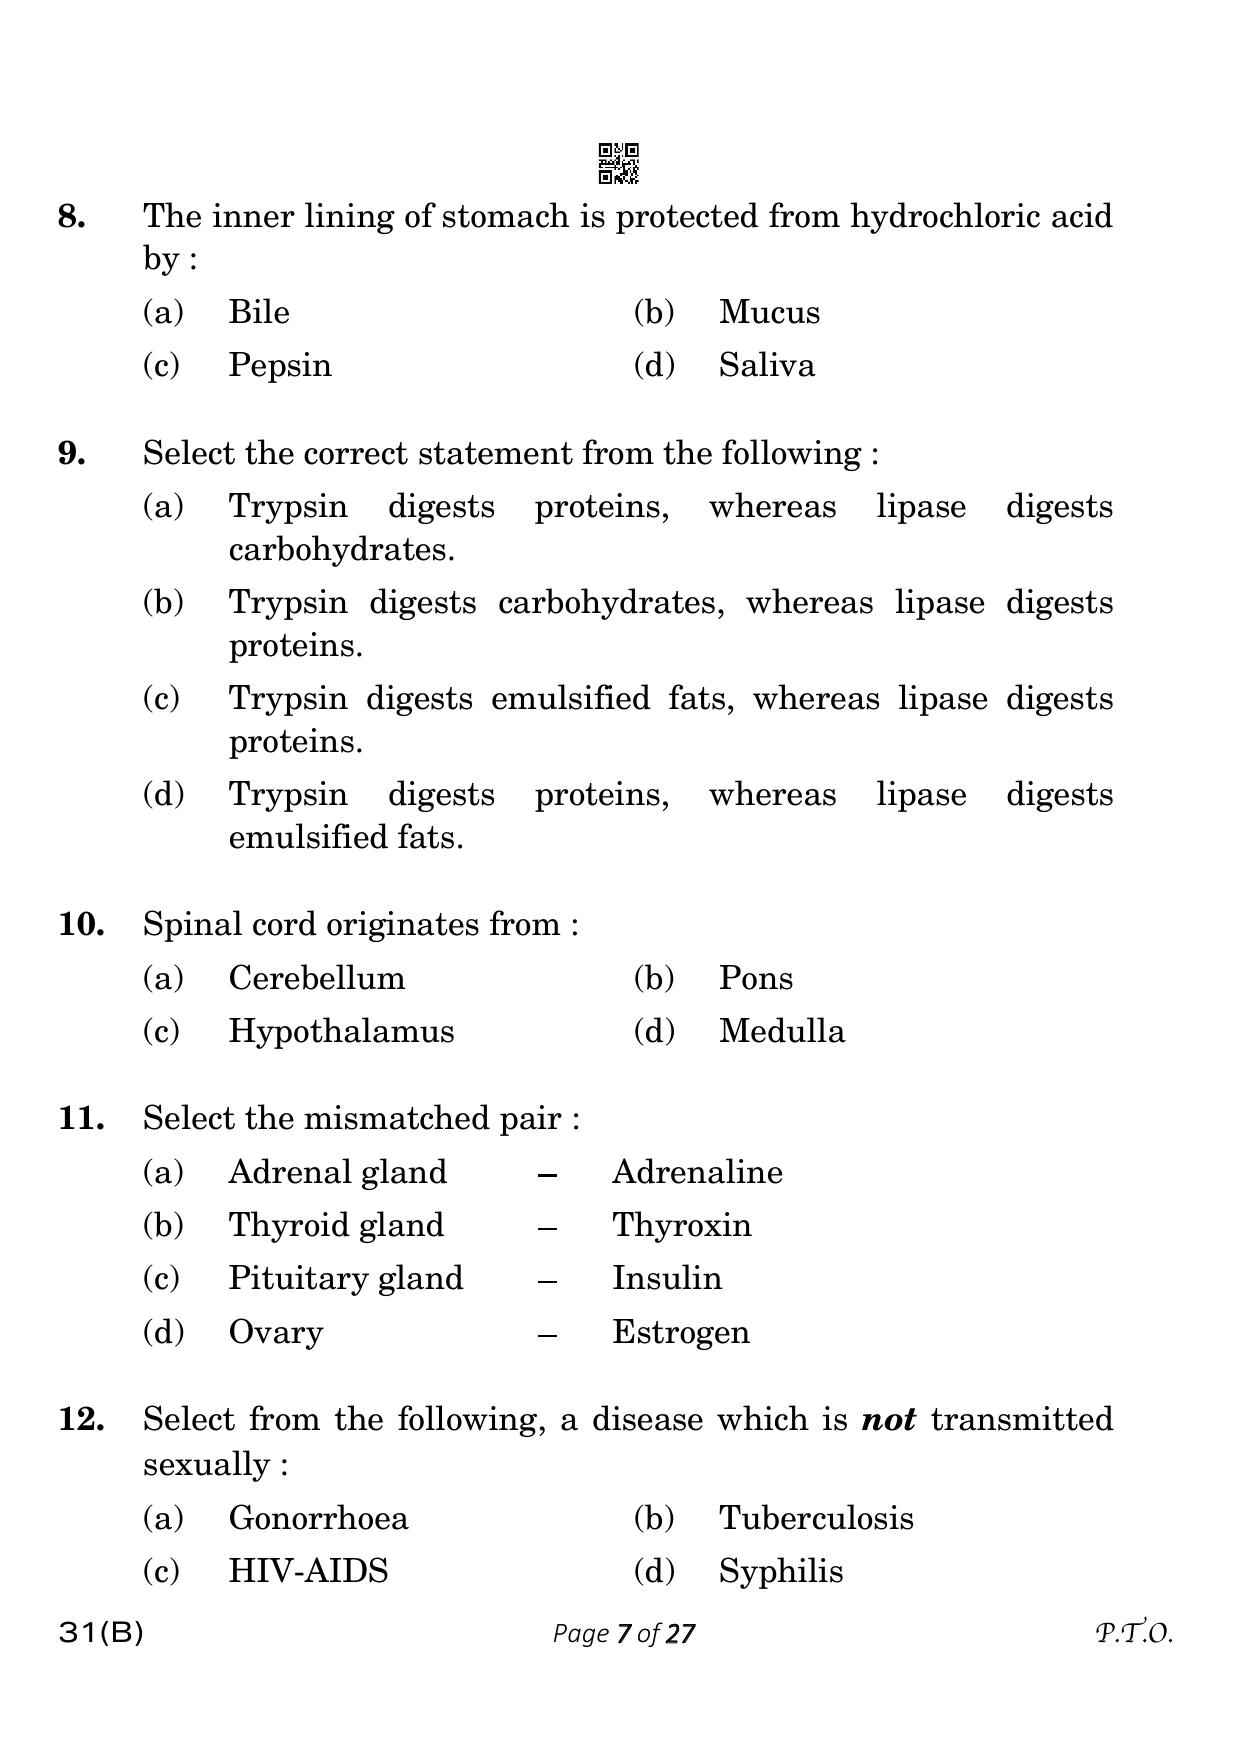 CBSE Class 10 31-B Science 2023 (Compartment) Question Paper - Page 7